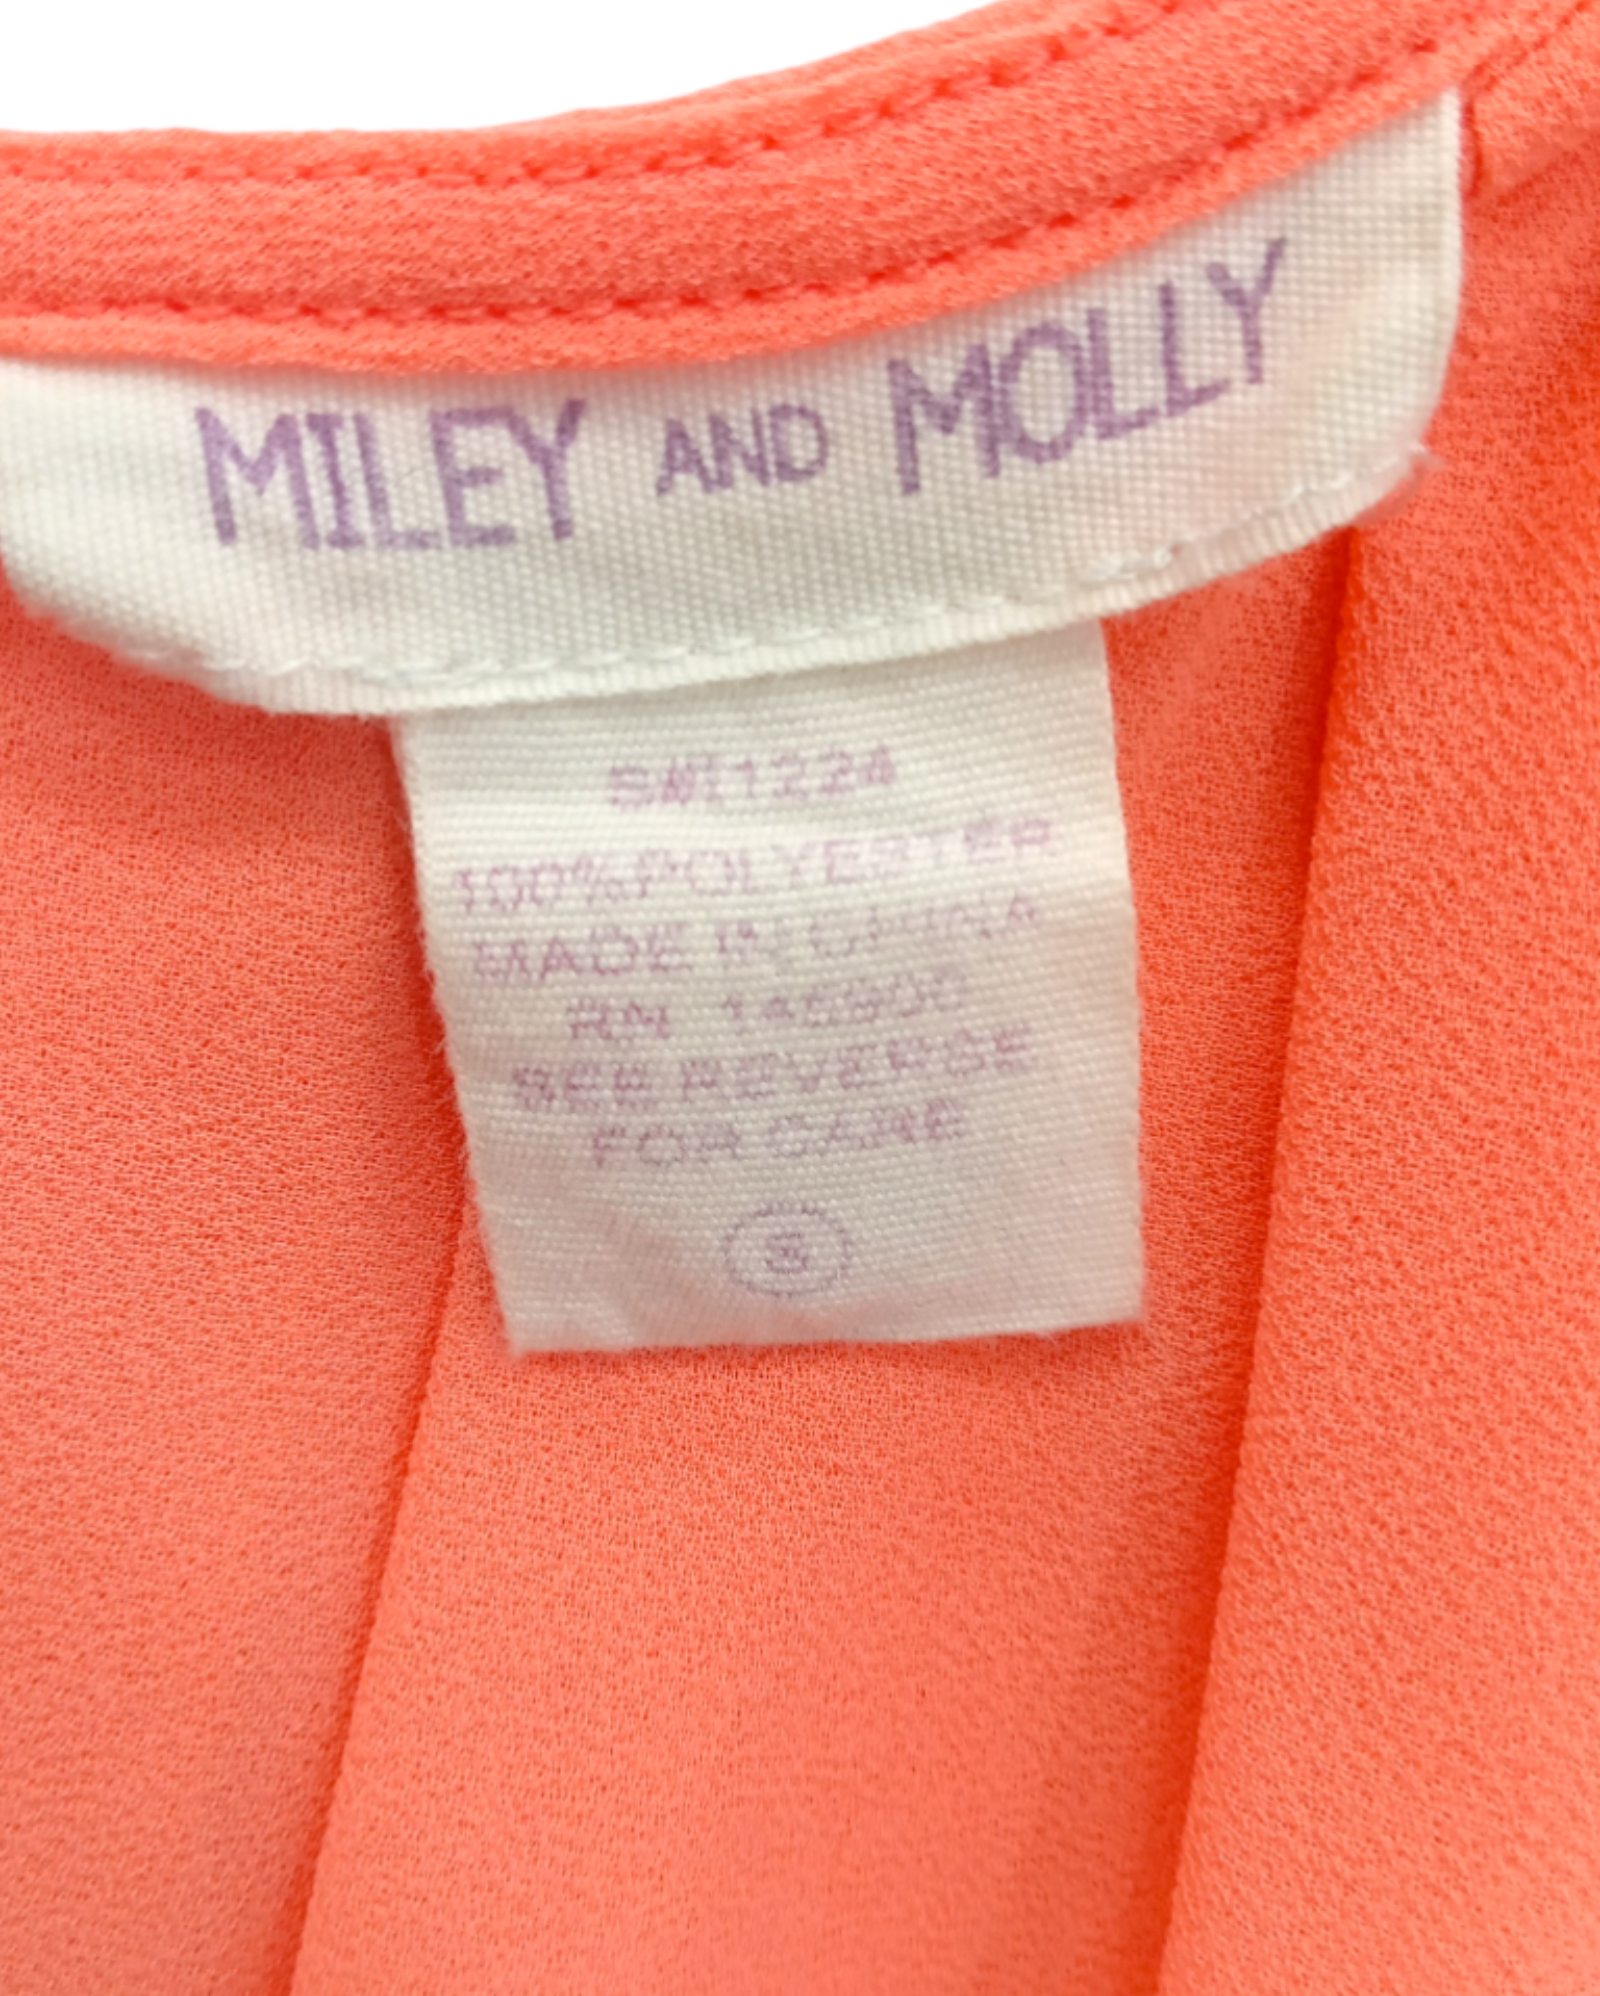 Blusas Casuales Miley and Molly